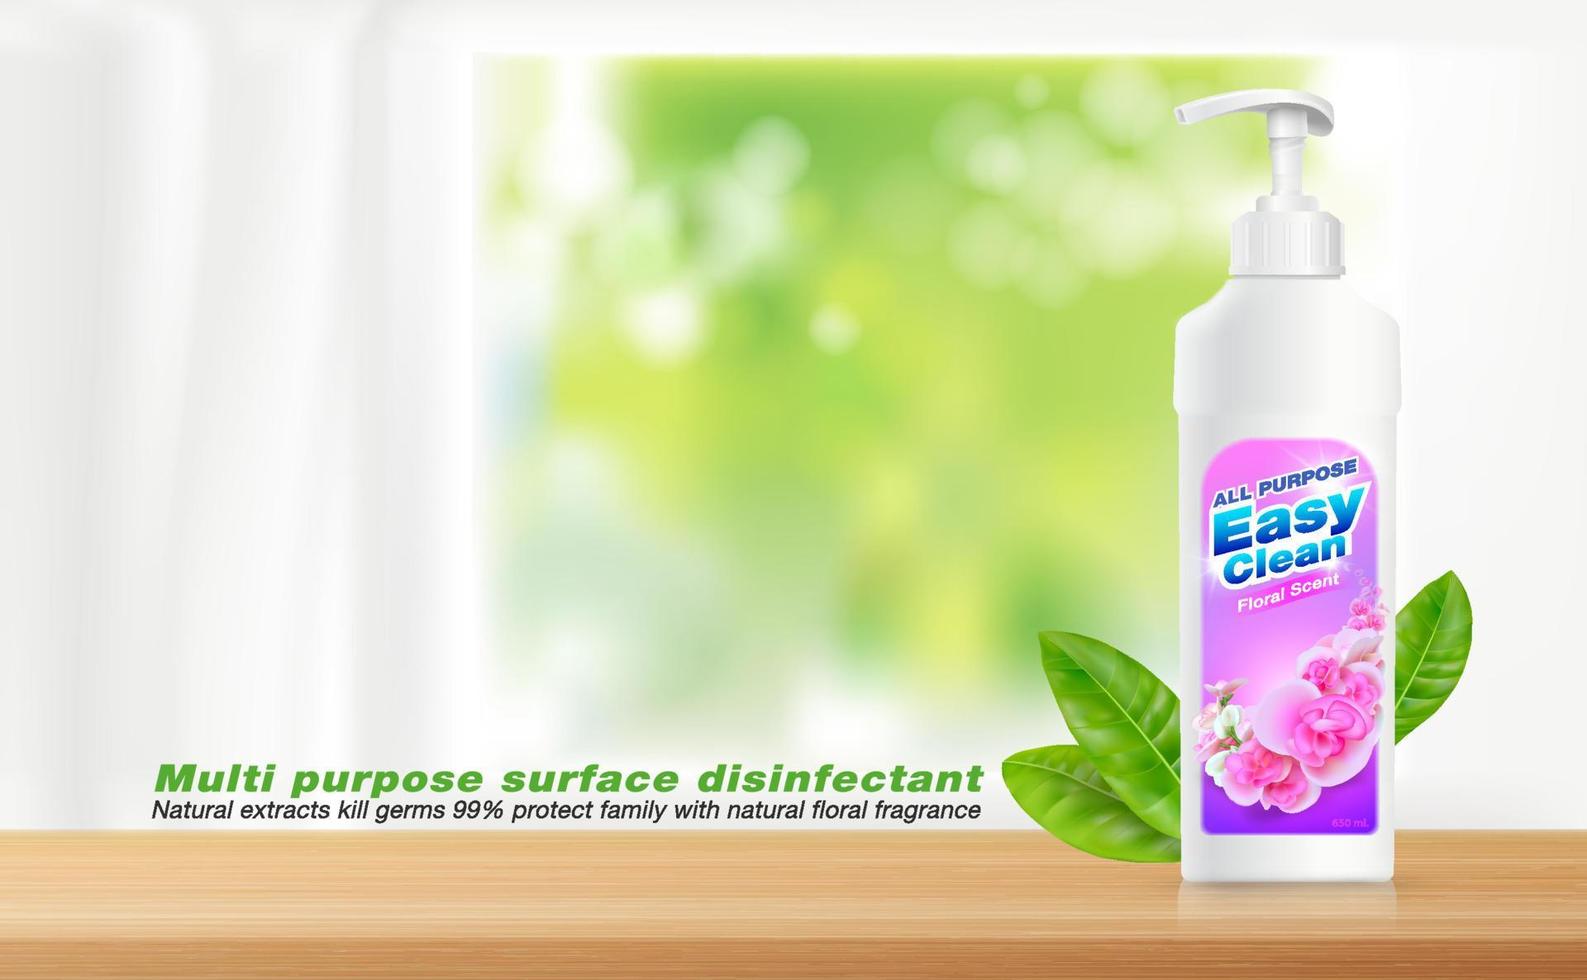 Multipurpose surface disinfectant ad. Natural extracts kill germs, protect your family with the fragrance of natural flowers. Realistic file. vector